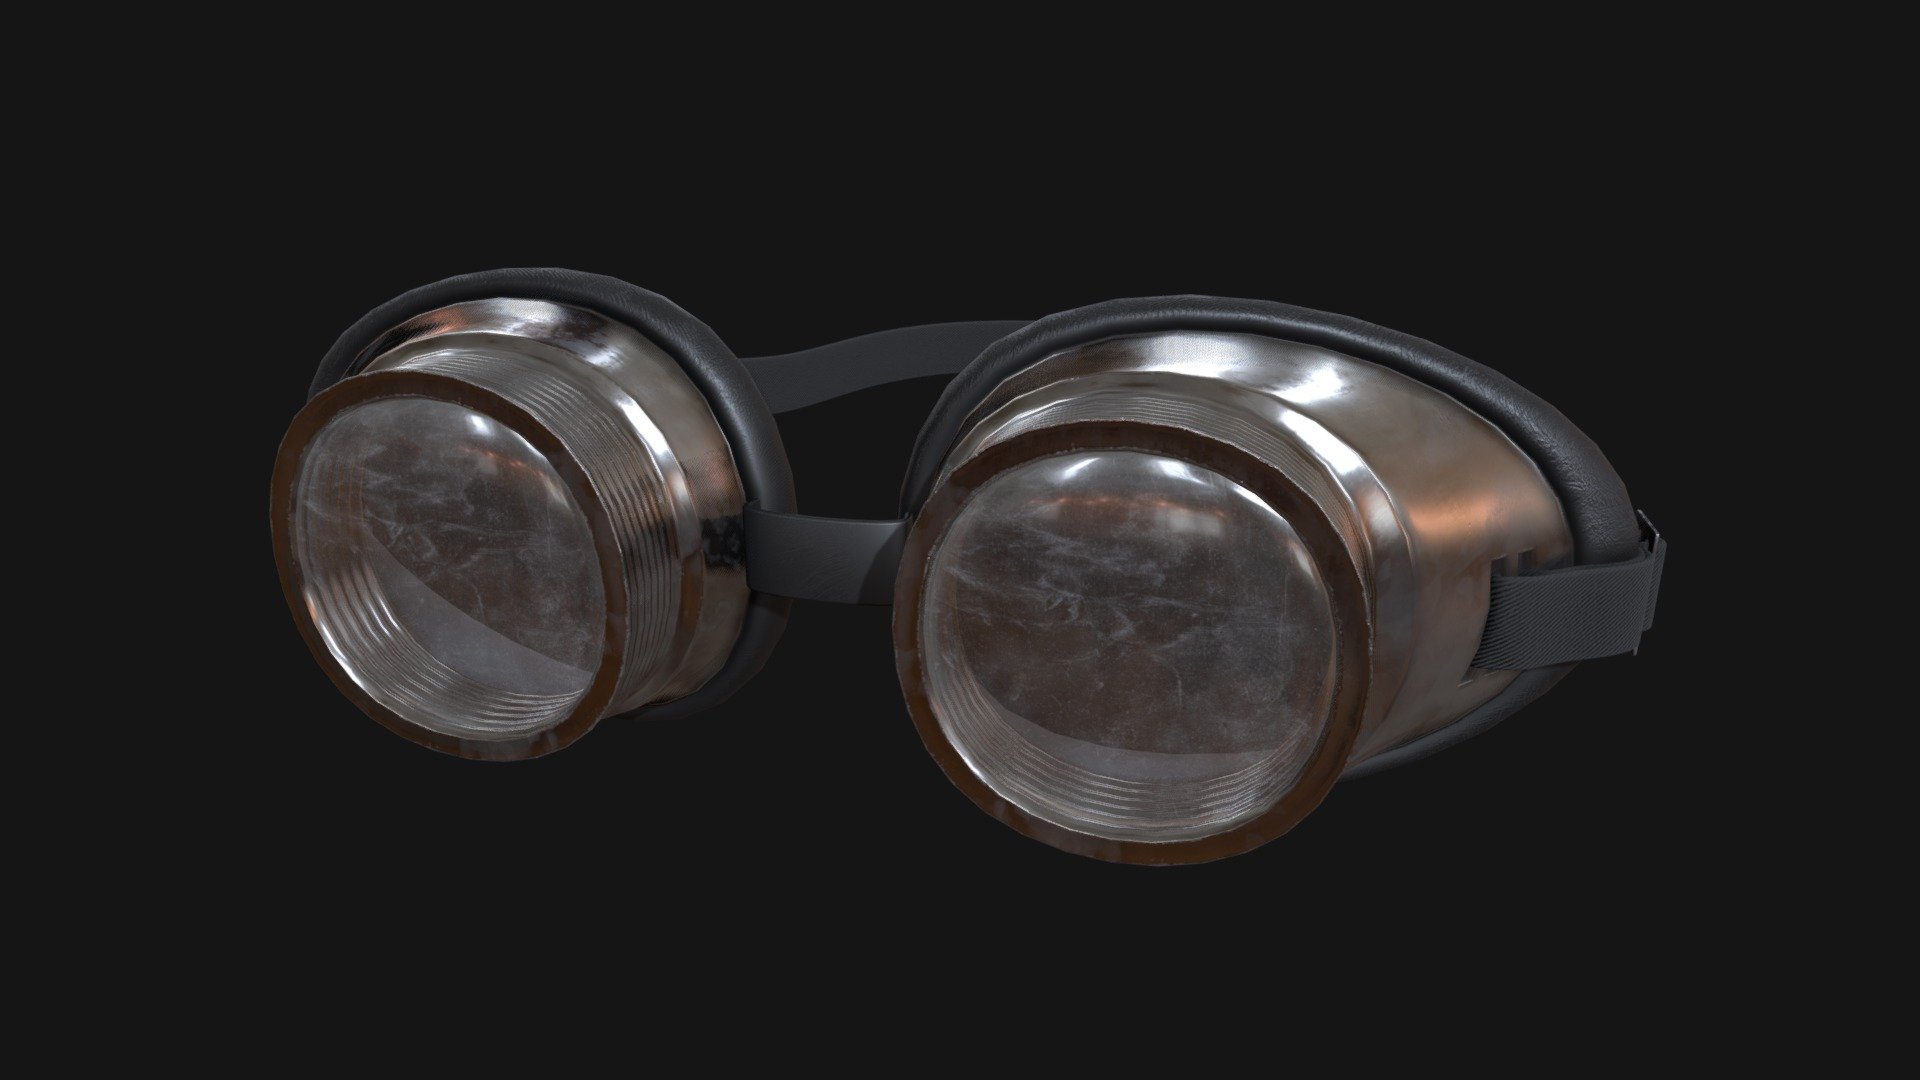 Goggles moddeled in blender and textured in substance painter 3d model